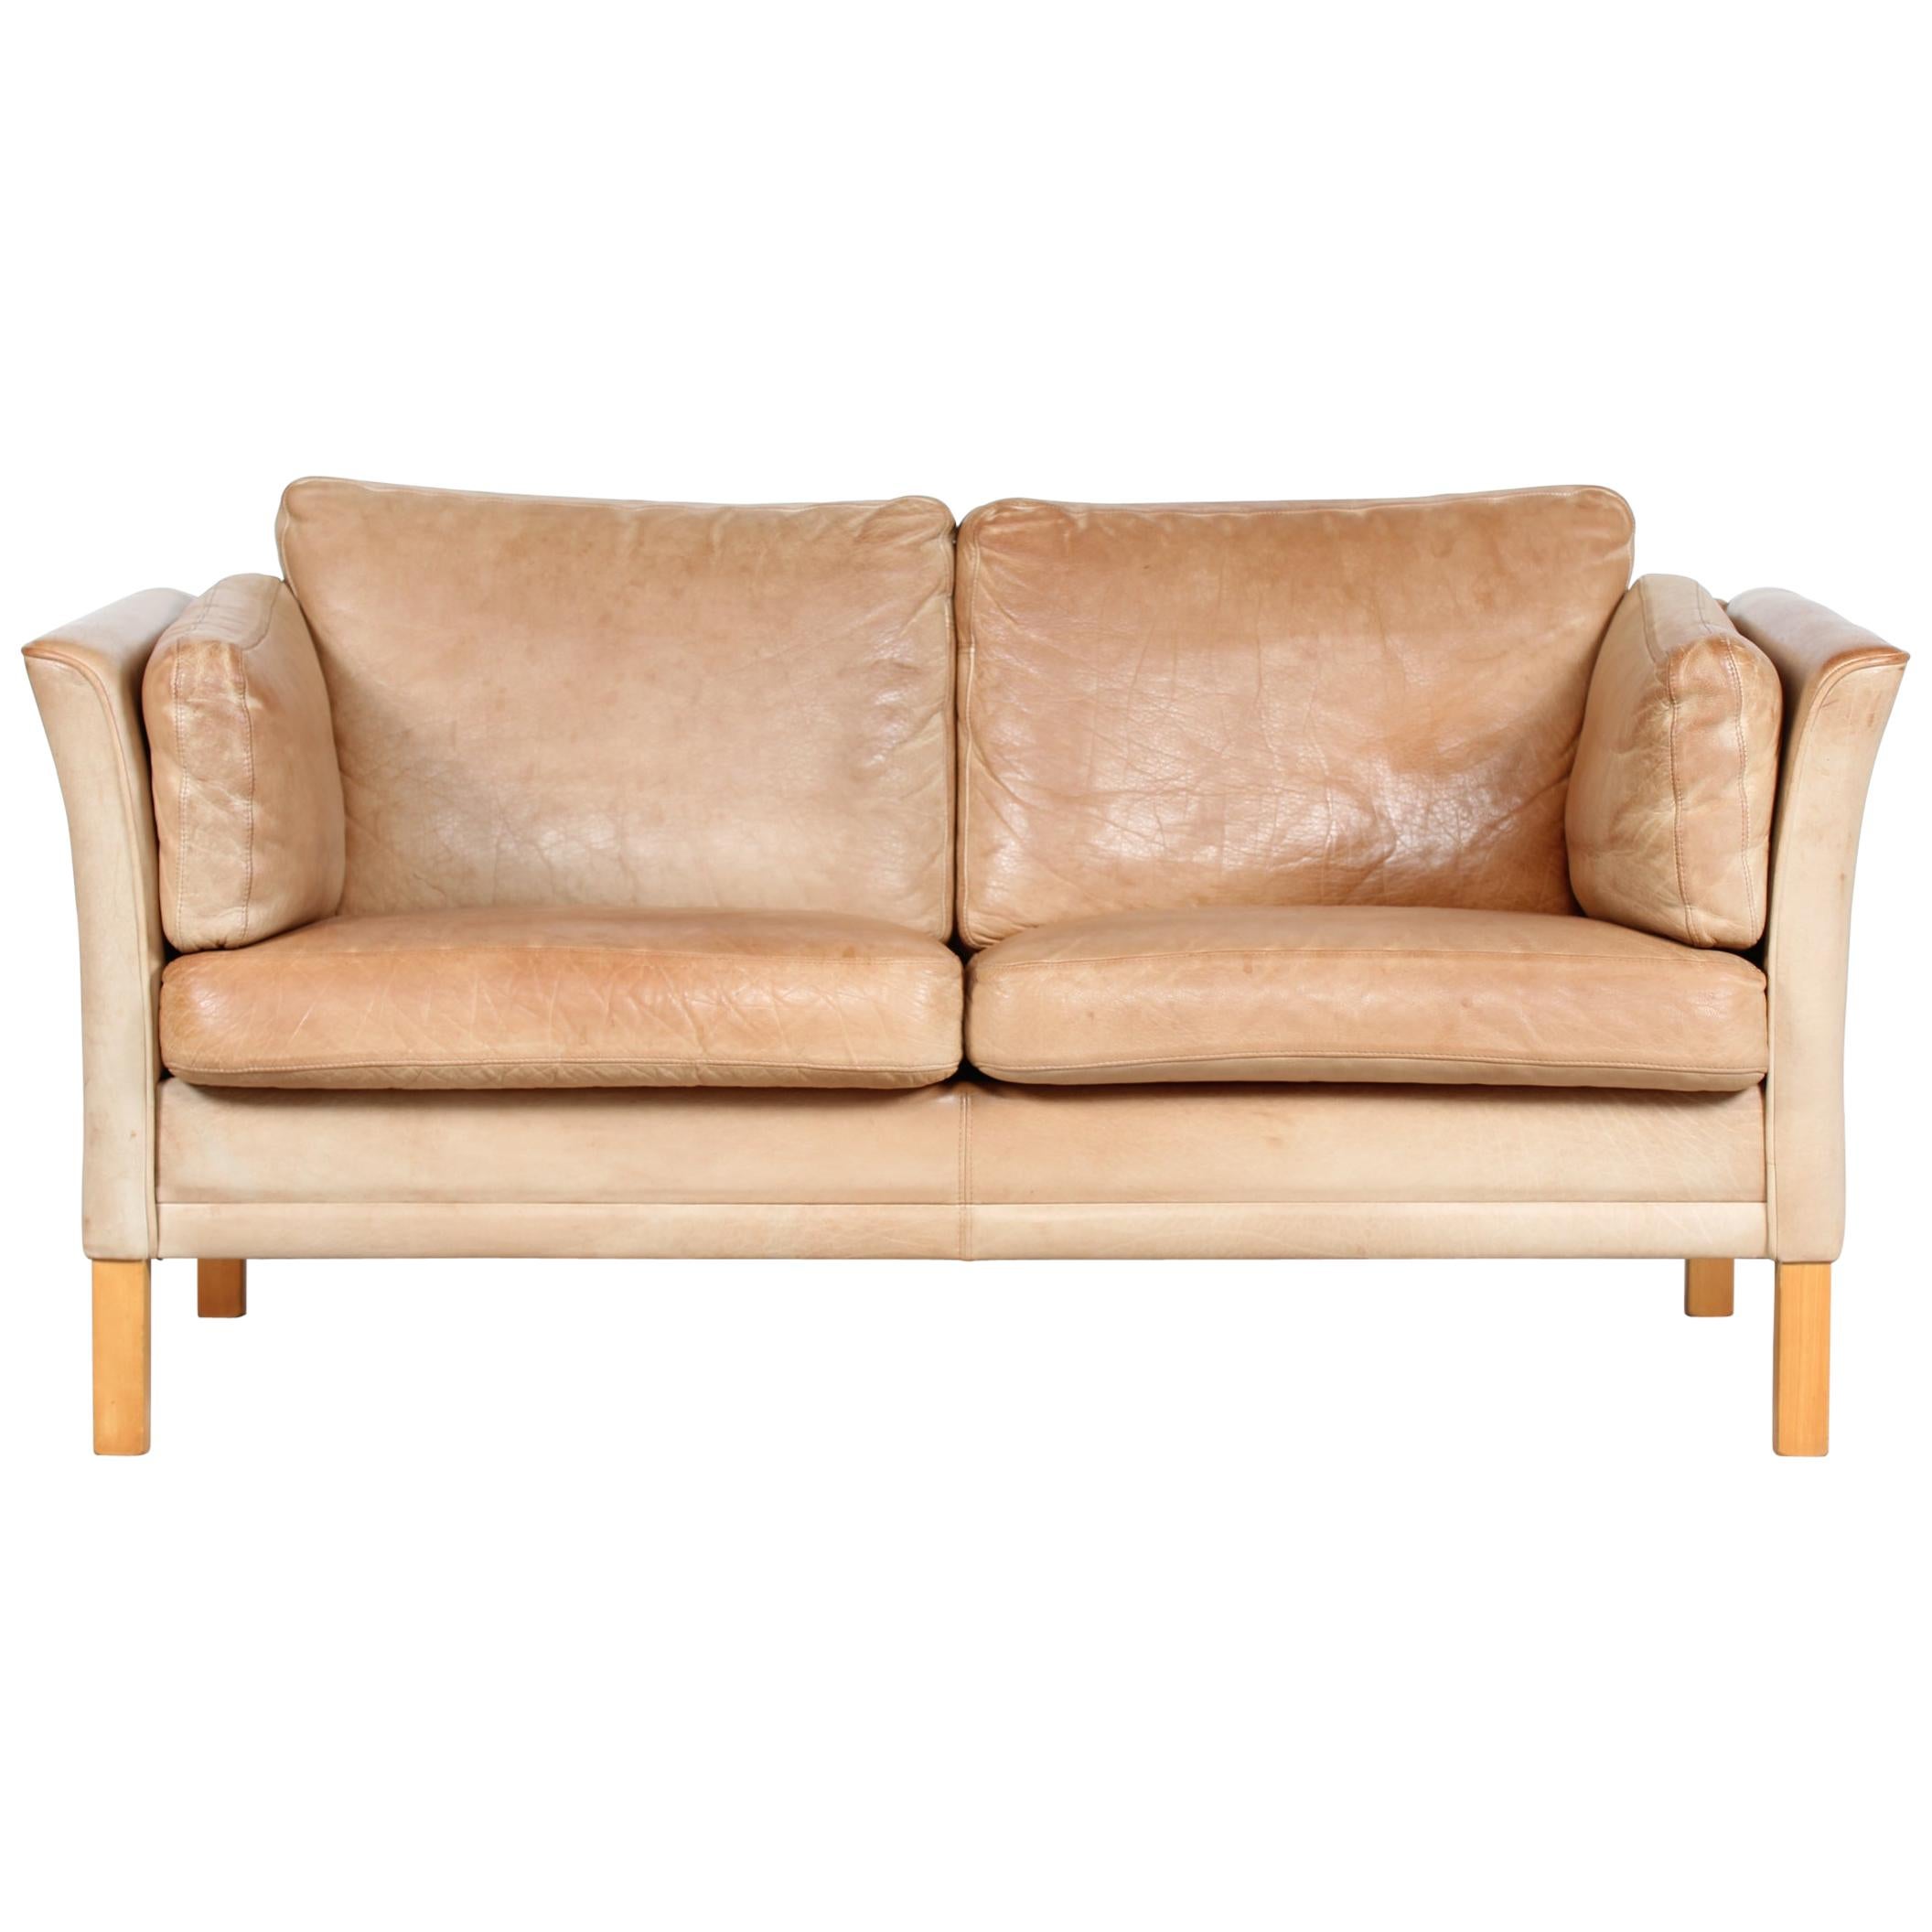 Danish Modern Two-Seat Sofa with Cognac-Colored Patina Leather Made in Danmark